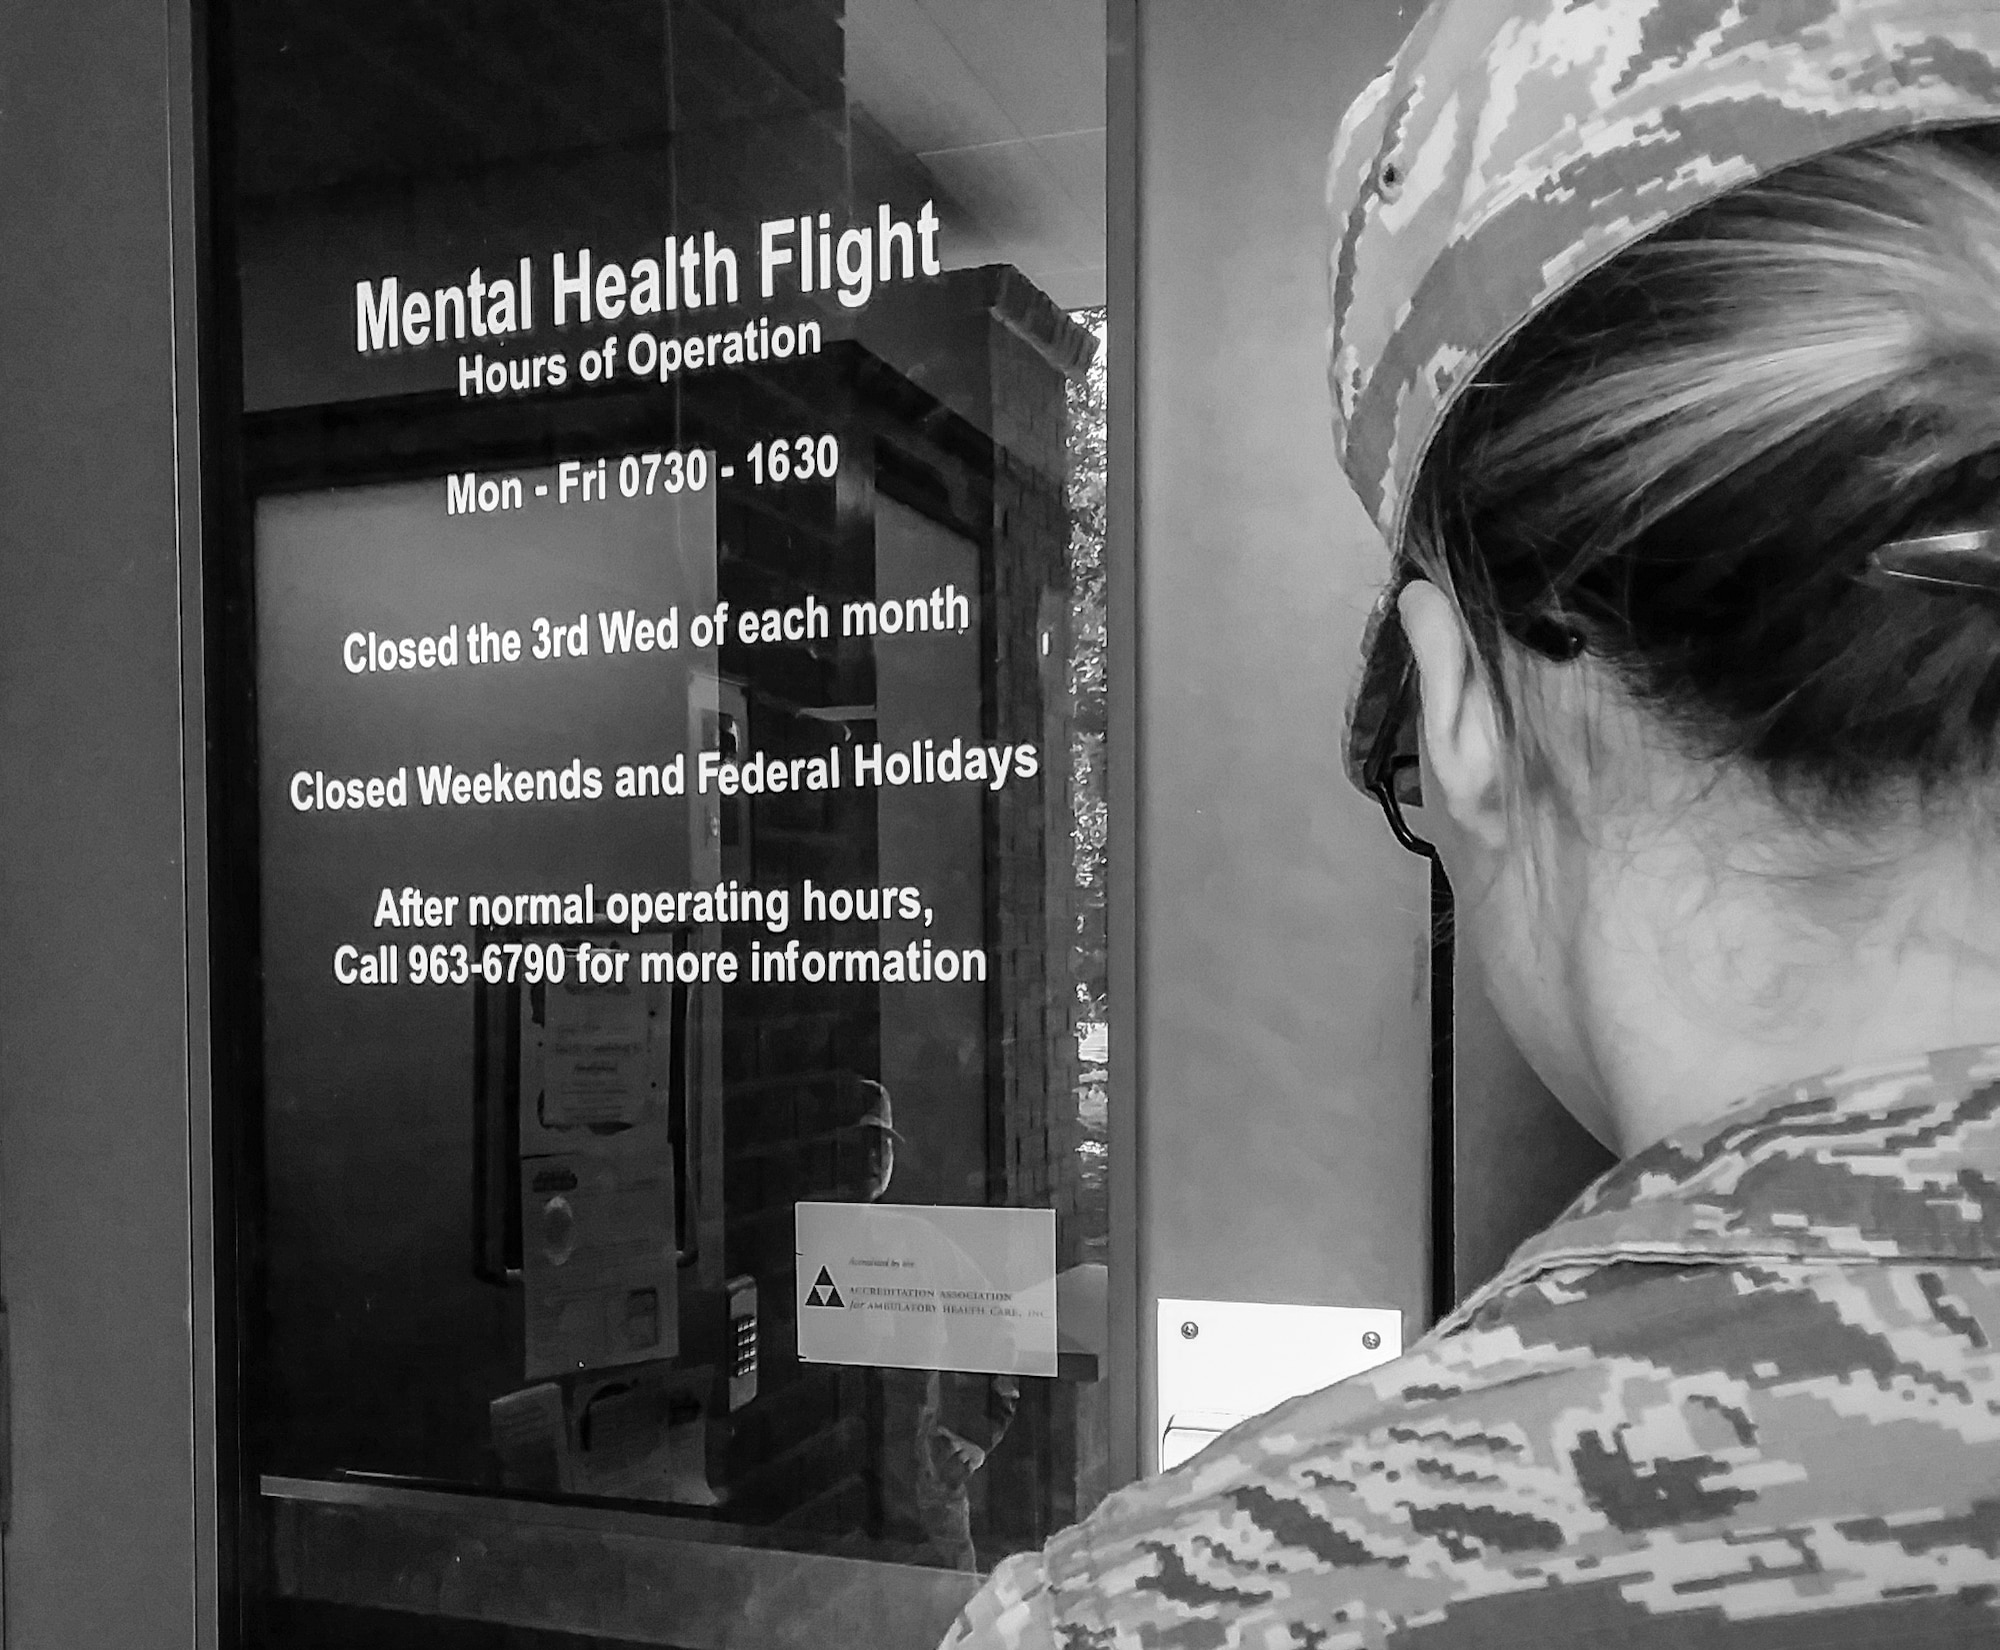 An Airman walks into Joint Base Charleston’s mental health clinic on post-traumatic stress awareness day June 27, 2017. Although PTSD may be associated with combat and the military, non-combat related incidents such as assaults, natural disasters, abuse and accidents can also cause the onset of the disorder. Starting in 2010, Congress named June 27 PTSD Awareness Day. In 2014, the Senate designated the full month of June for National PTSD Awareness to promote effective treatment of the disorder throughout the year.